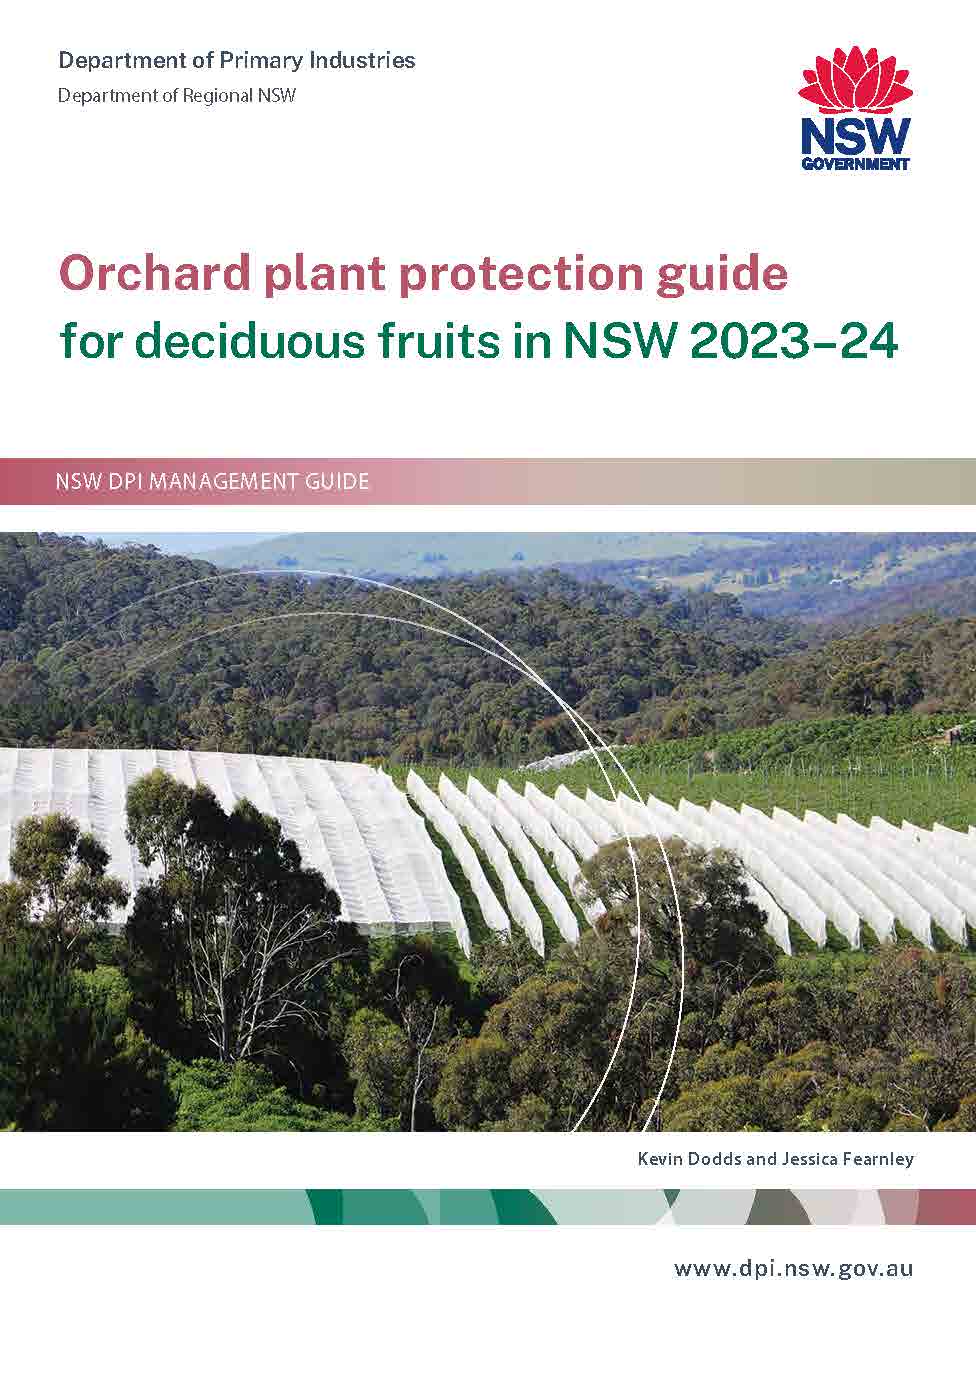 Orchard-plant-protection-guide-2023 1